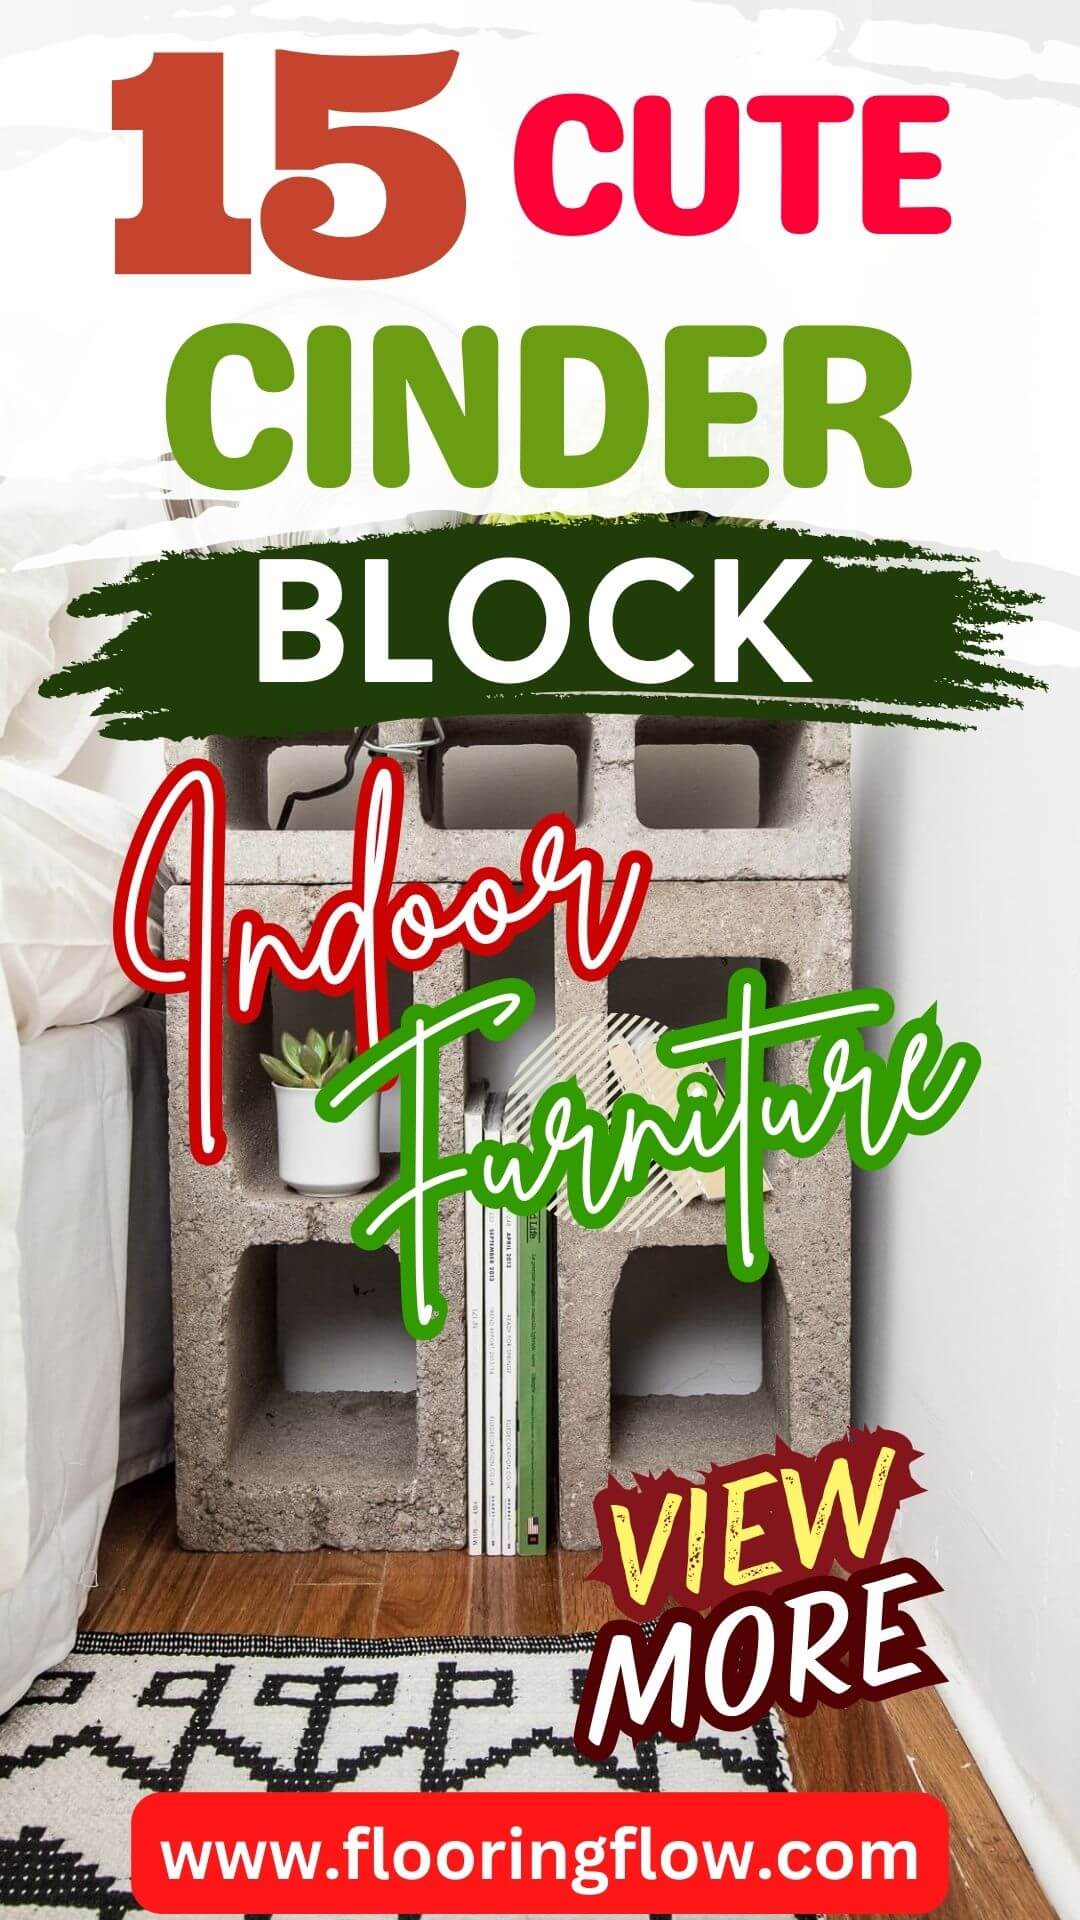 Cute Indoor Cinder Block Furniture Ideas For Living Room On A Budget